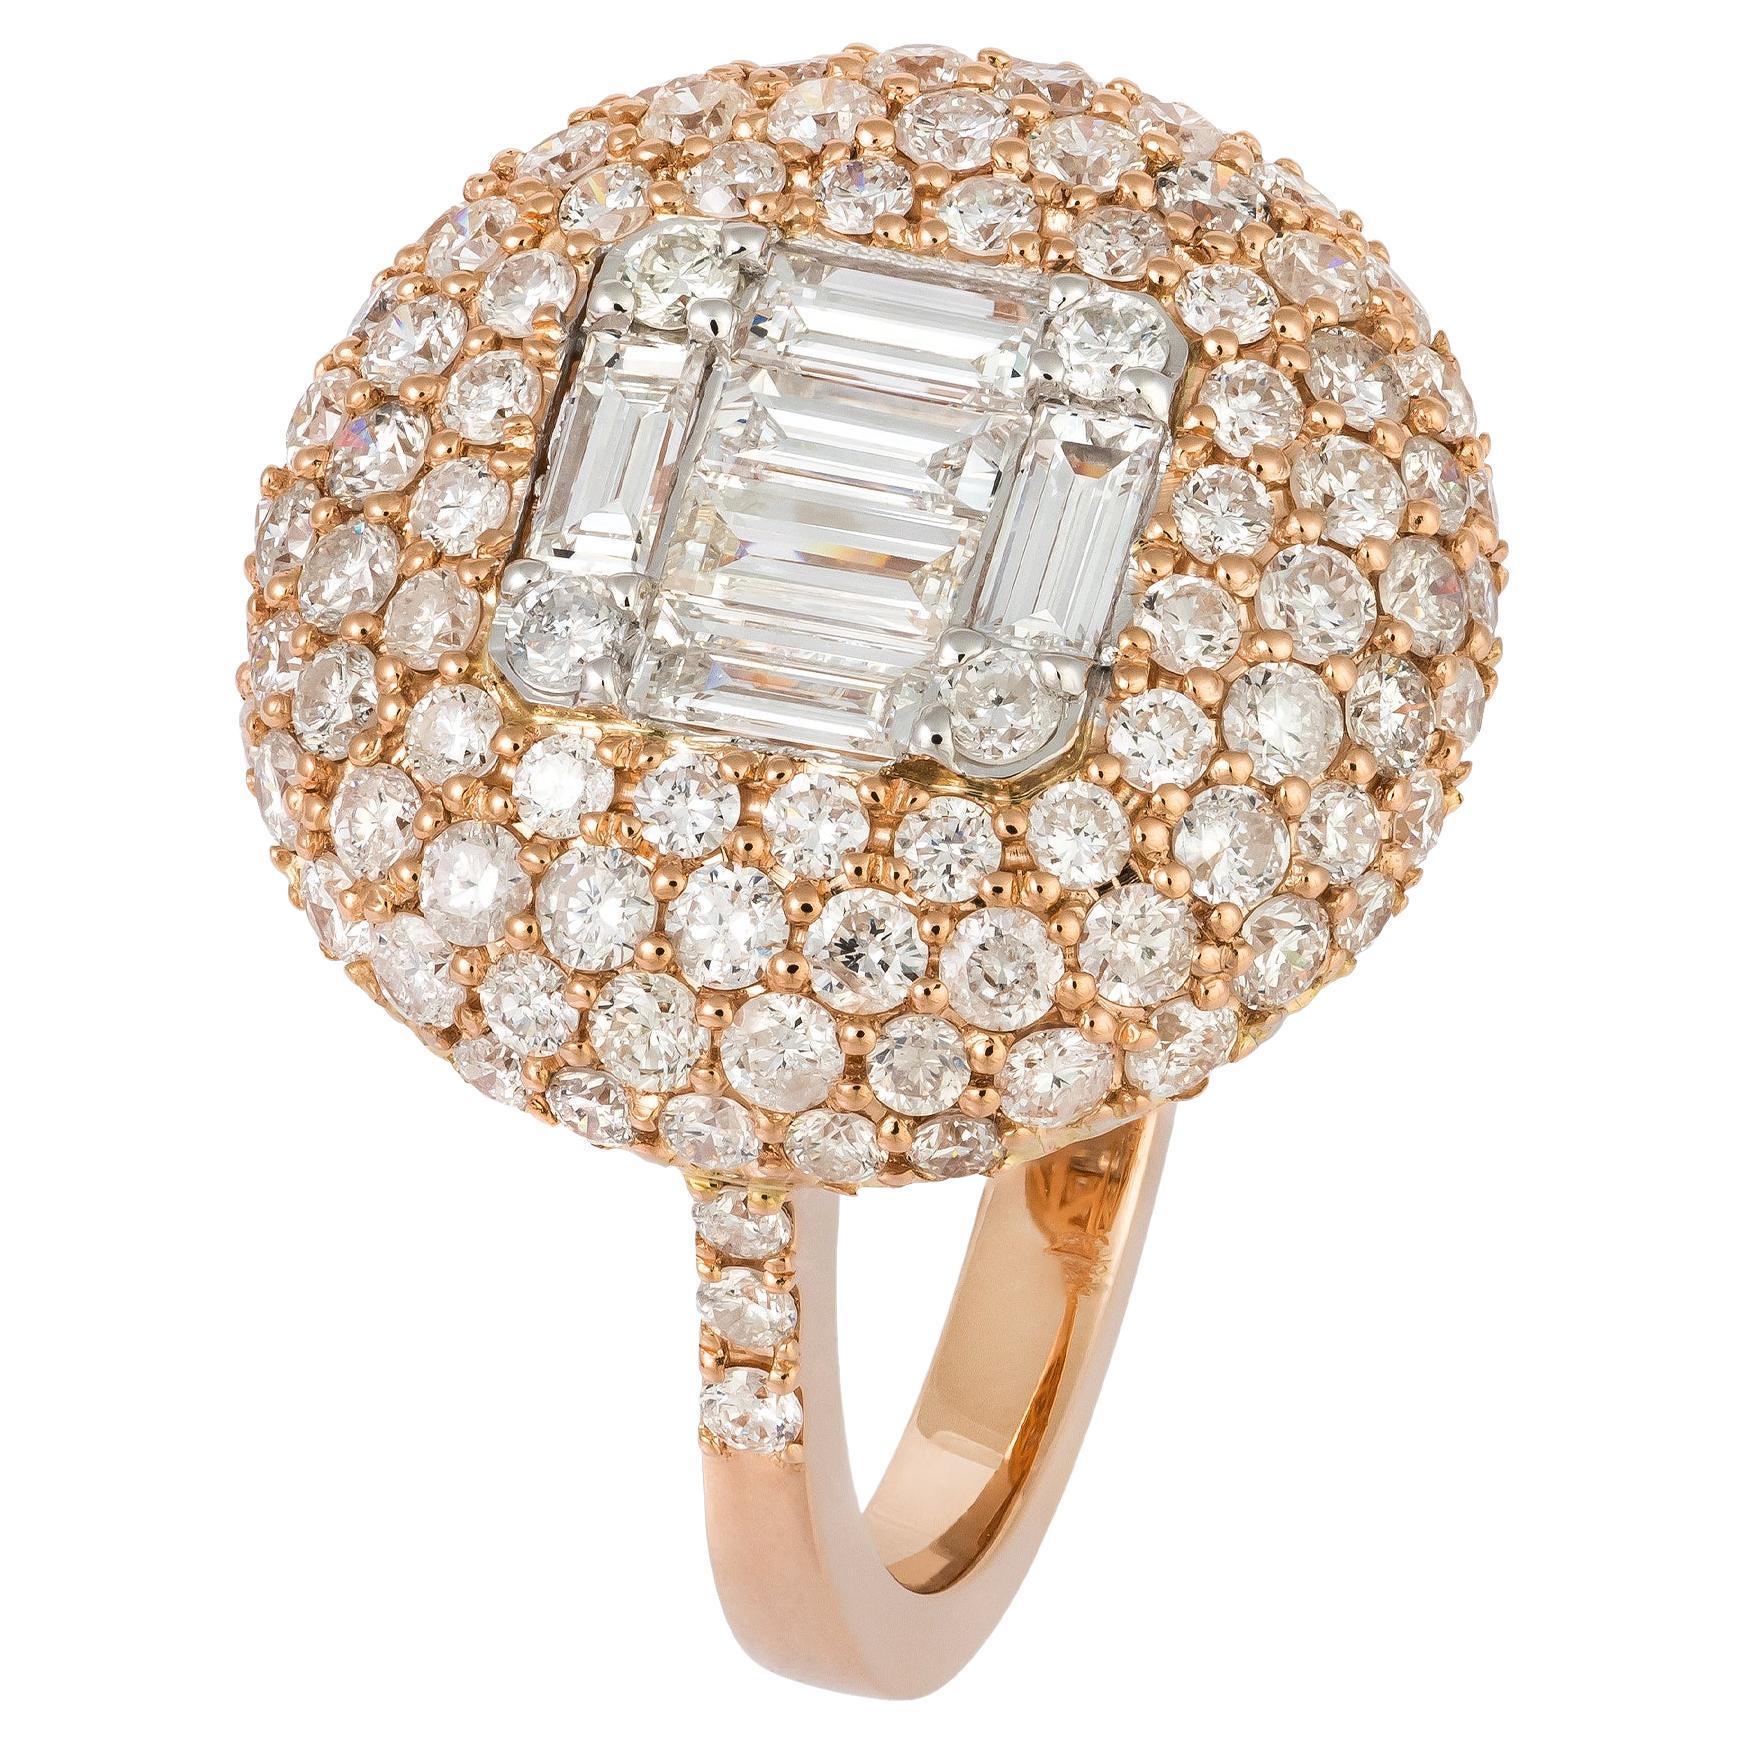 Impressive Pink White 18K Gold Yellow Diamond Ring for Her